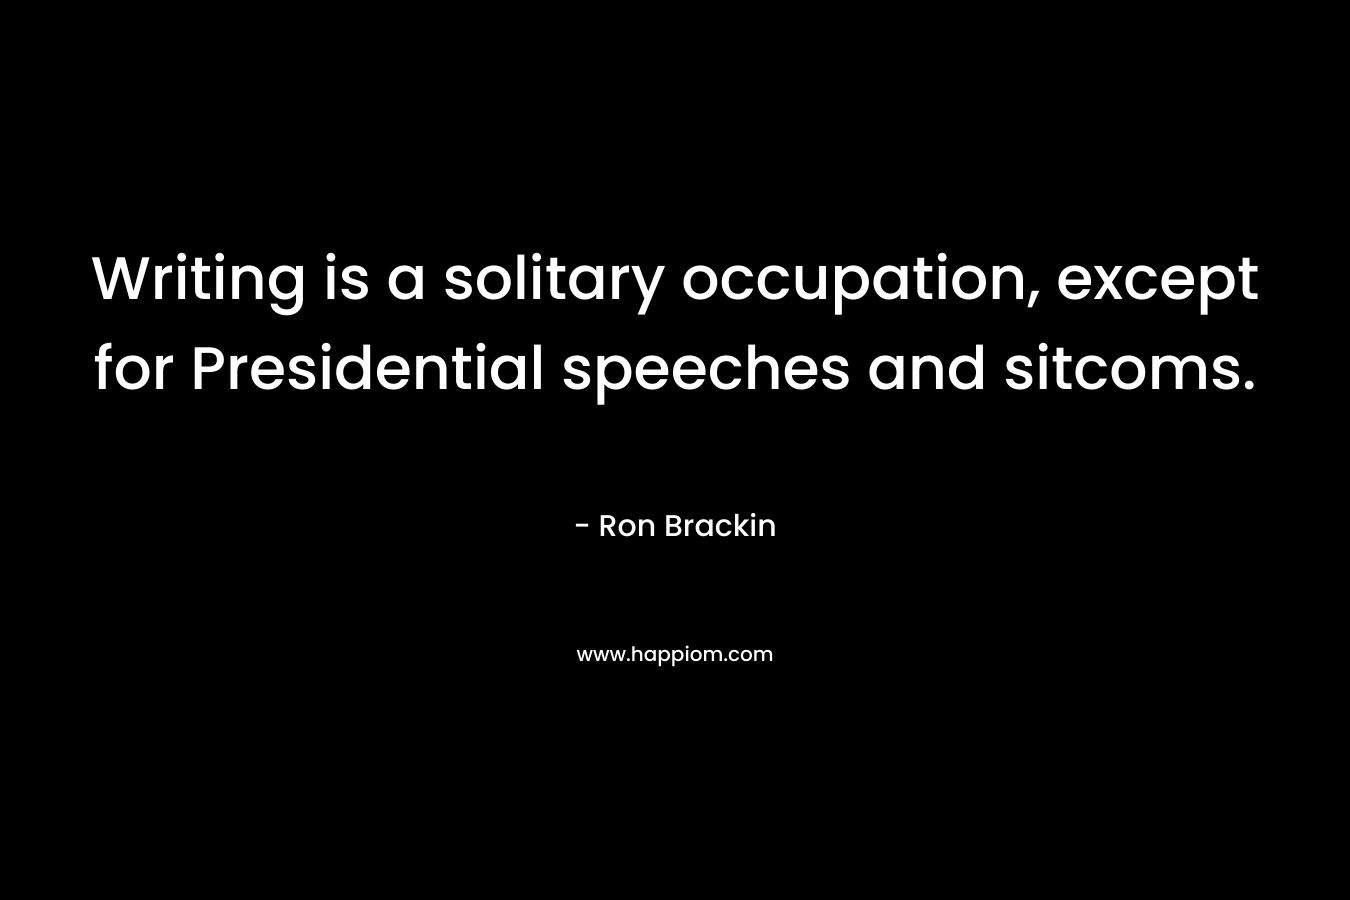 Writing is a solitary occupation, except for Presidential speeches and sitcoms. – Ron Brackin